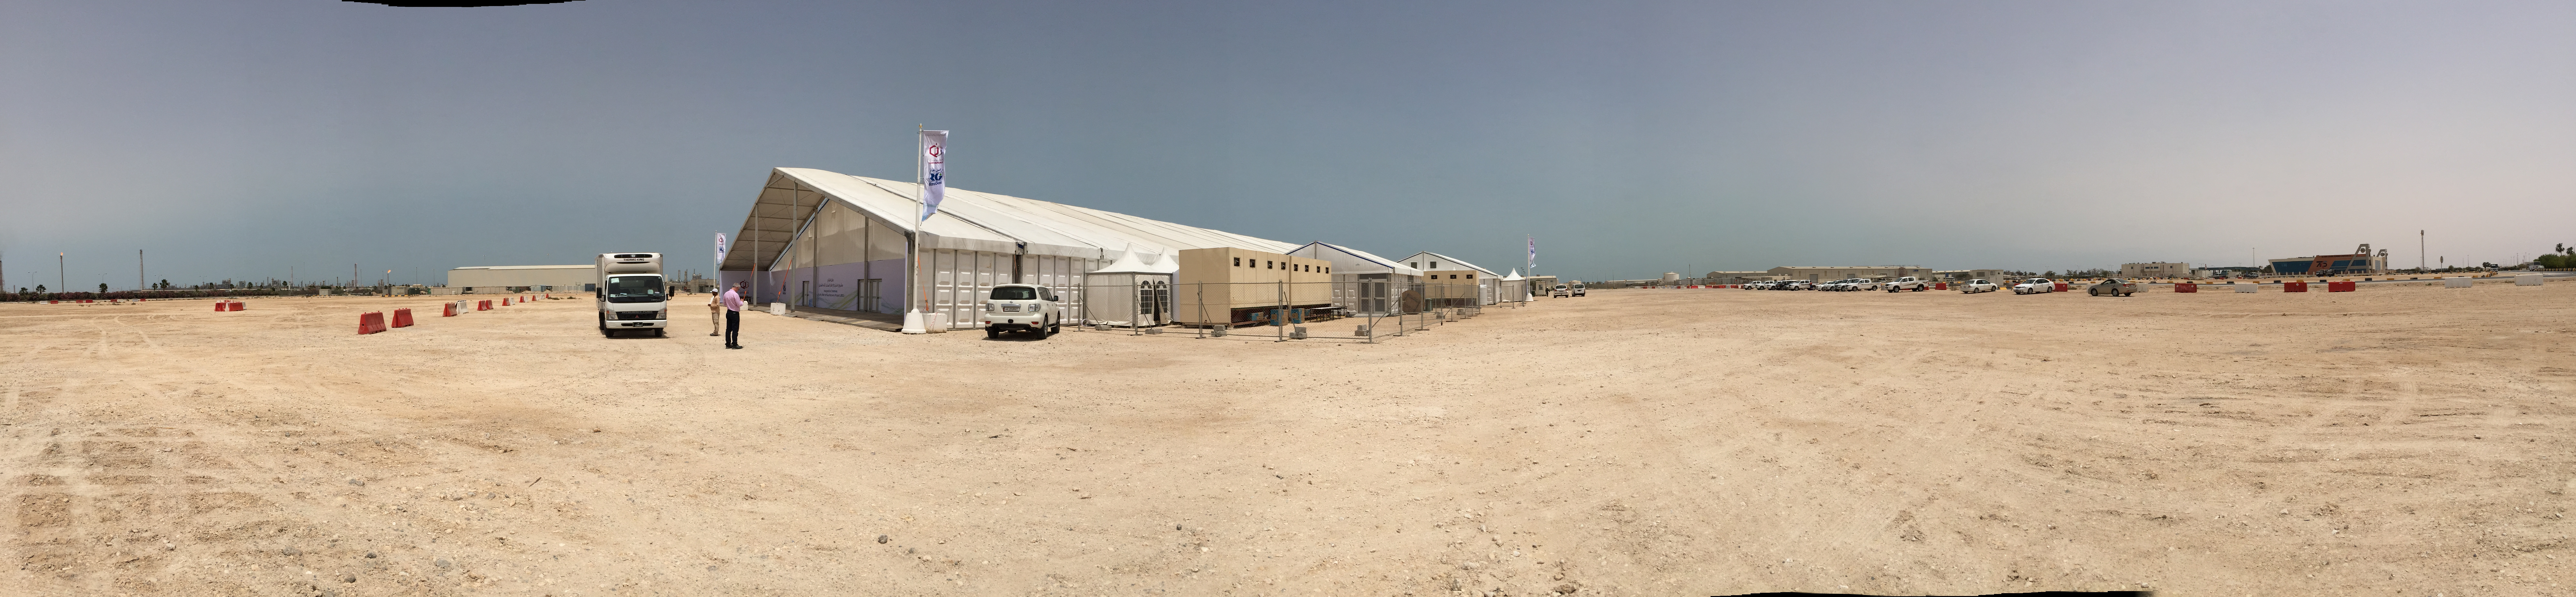 The tent-venue in the middle of the desert of Ras Laffan Industrial City